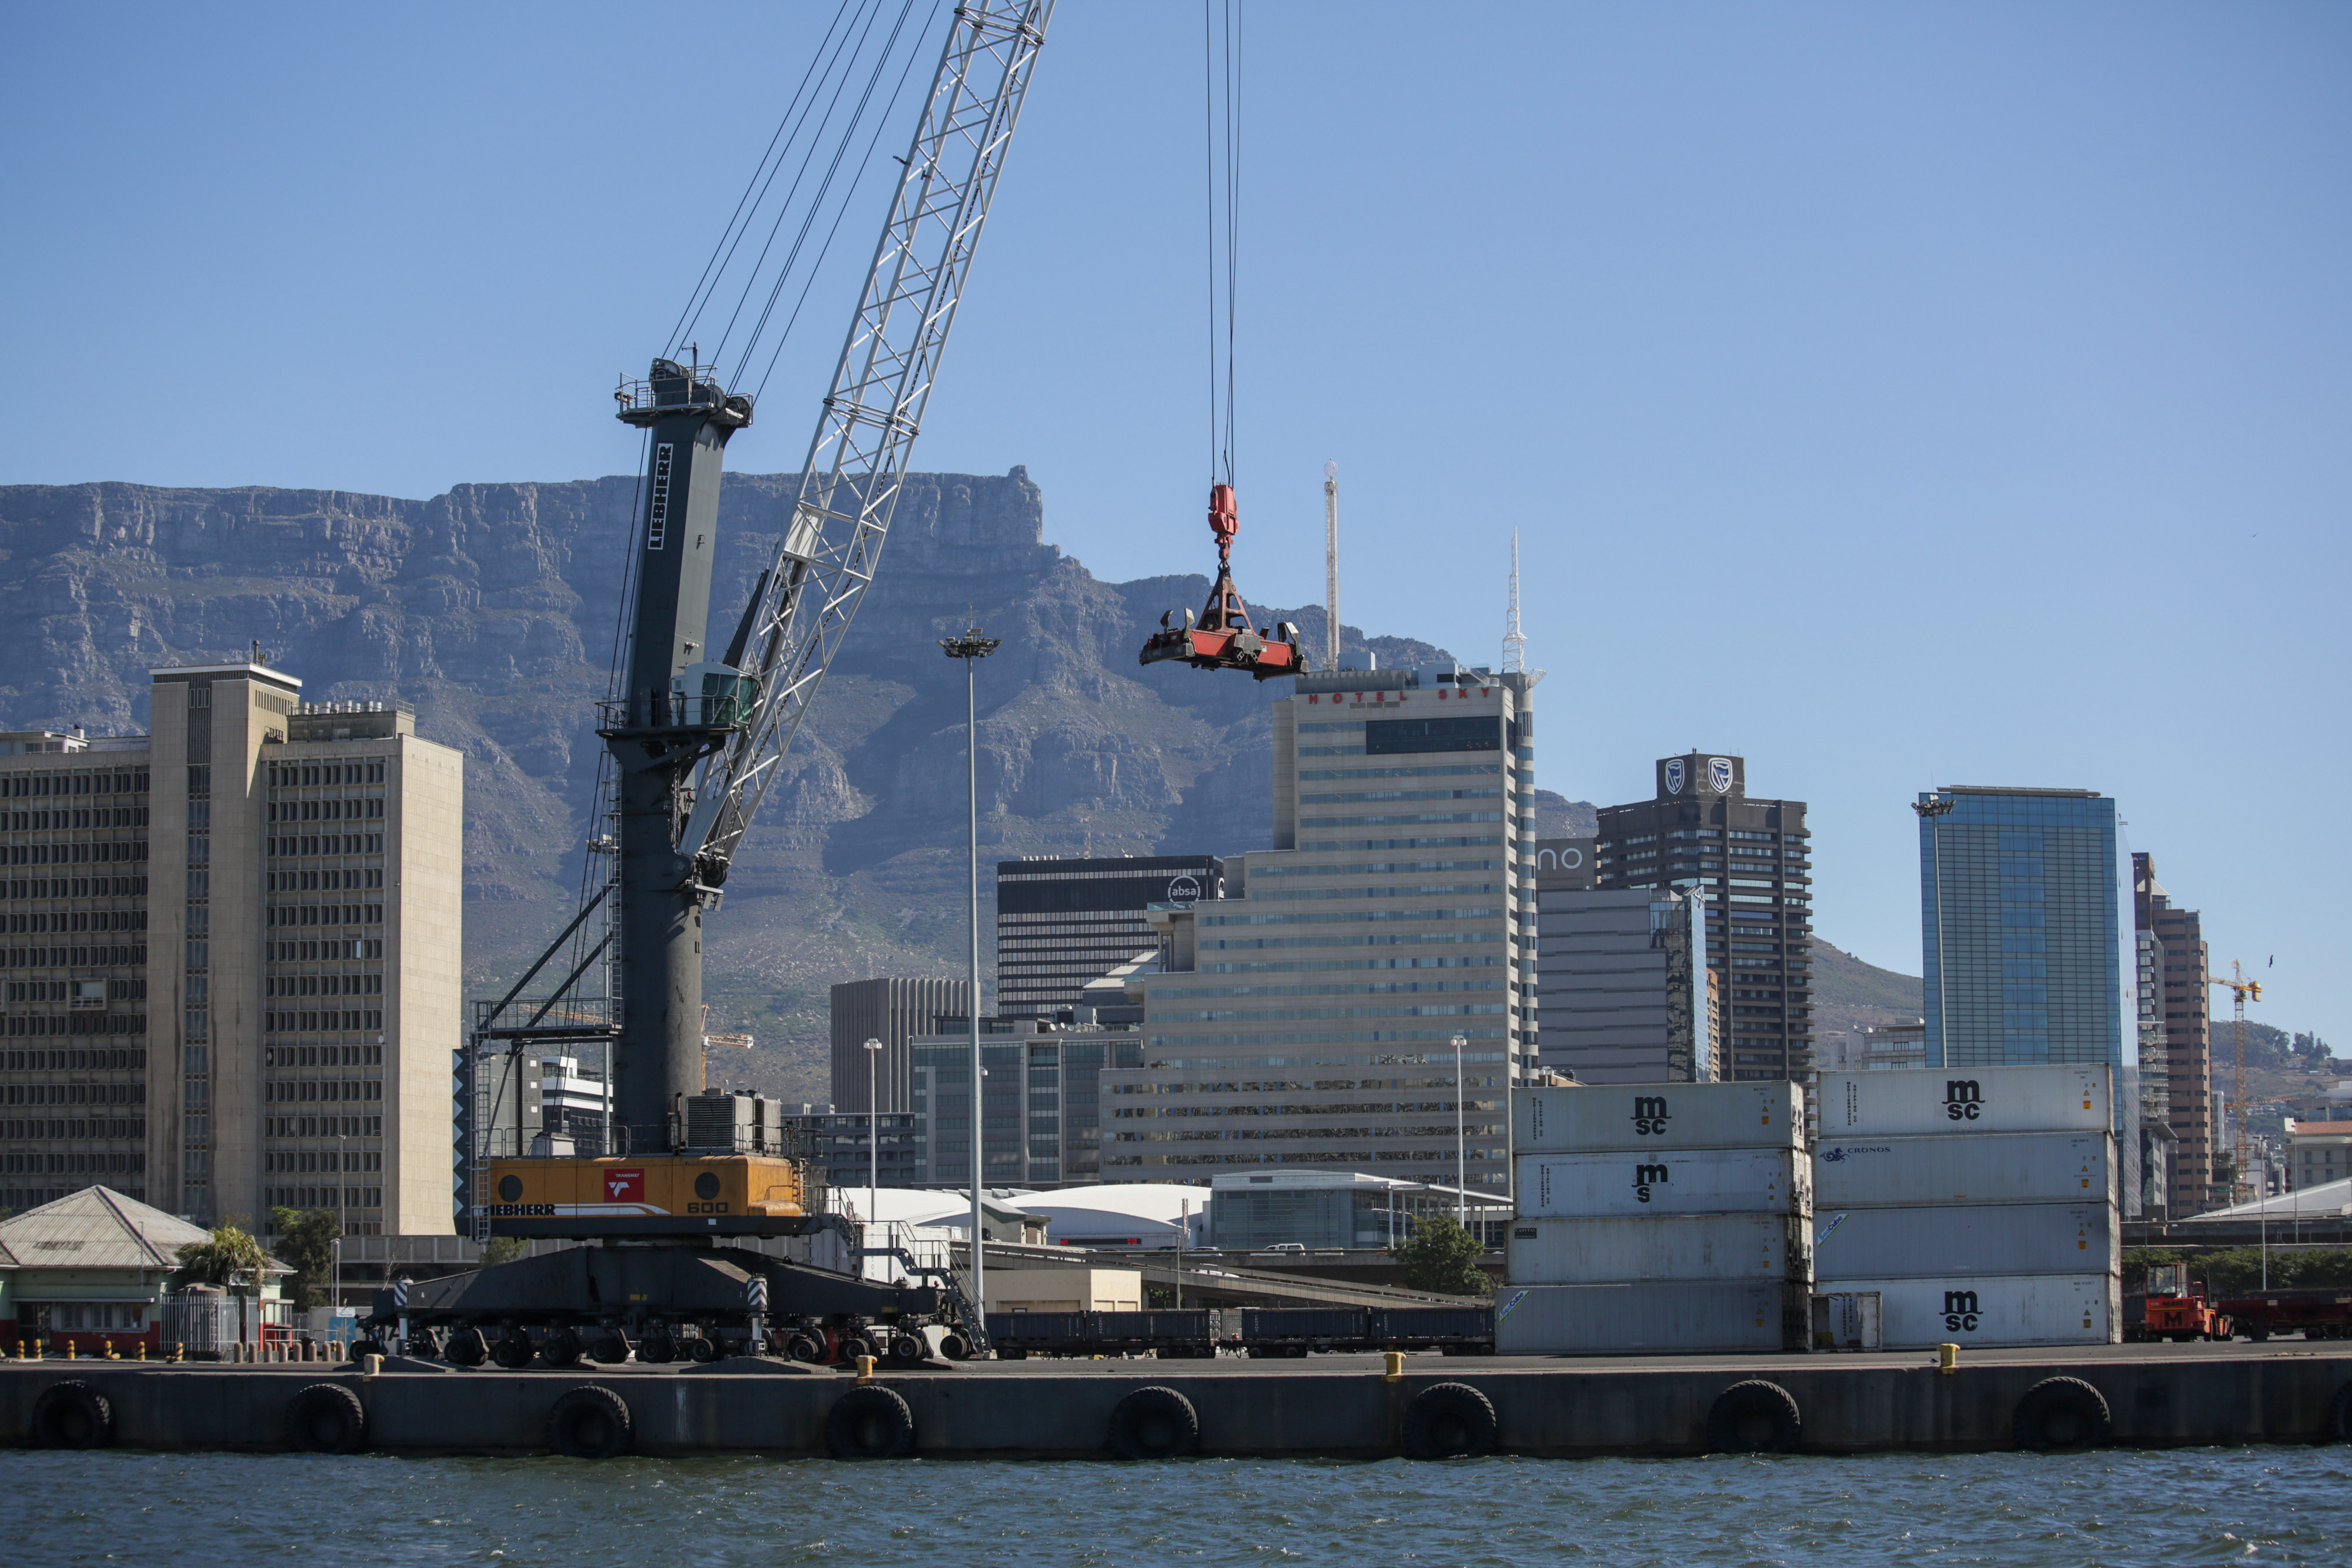 A ship-to-shore crane at the Port of Cape Town, in South Africa.